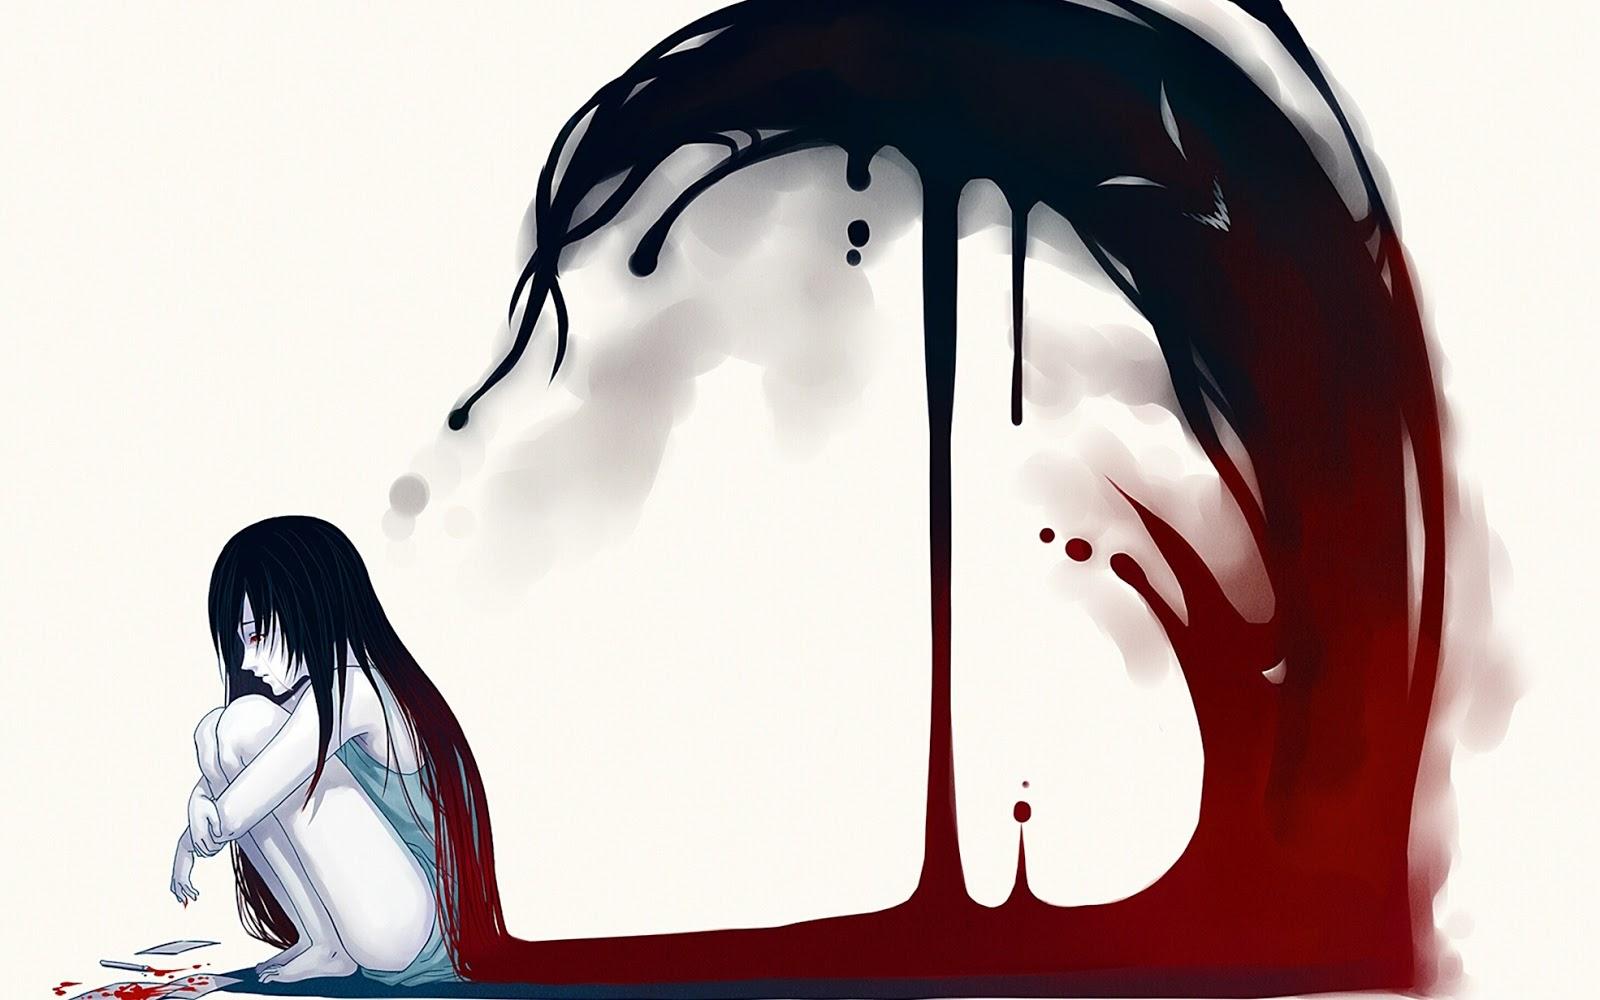 Crying Blood Wallpaper. Crying Wallpaper, Snow White Crying Wallpaper and Crying Angel Wallpaper